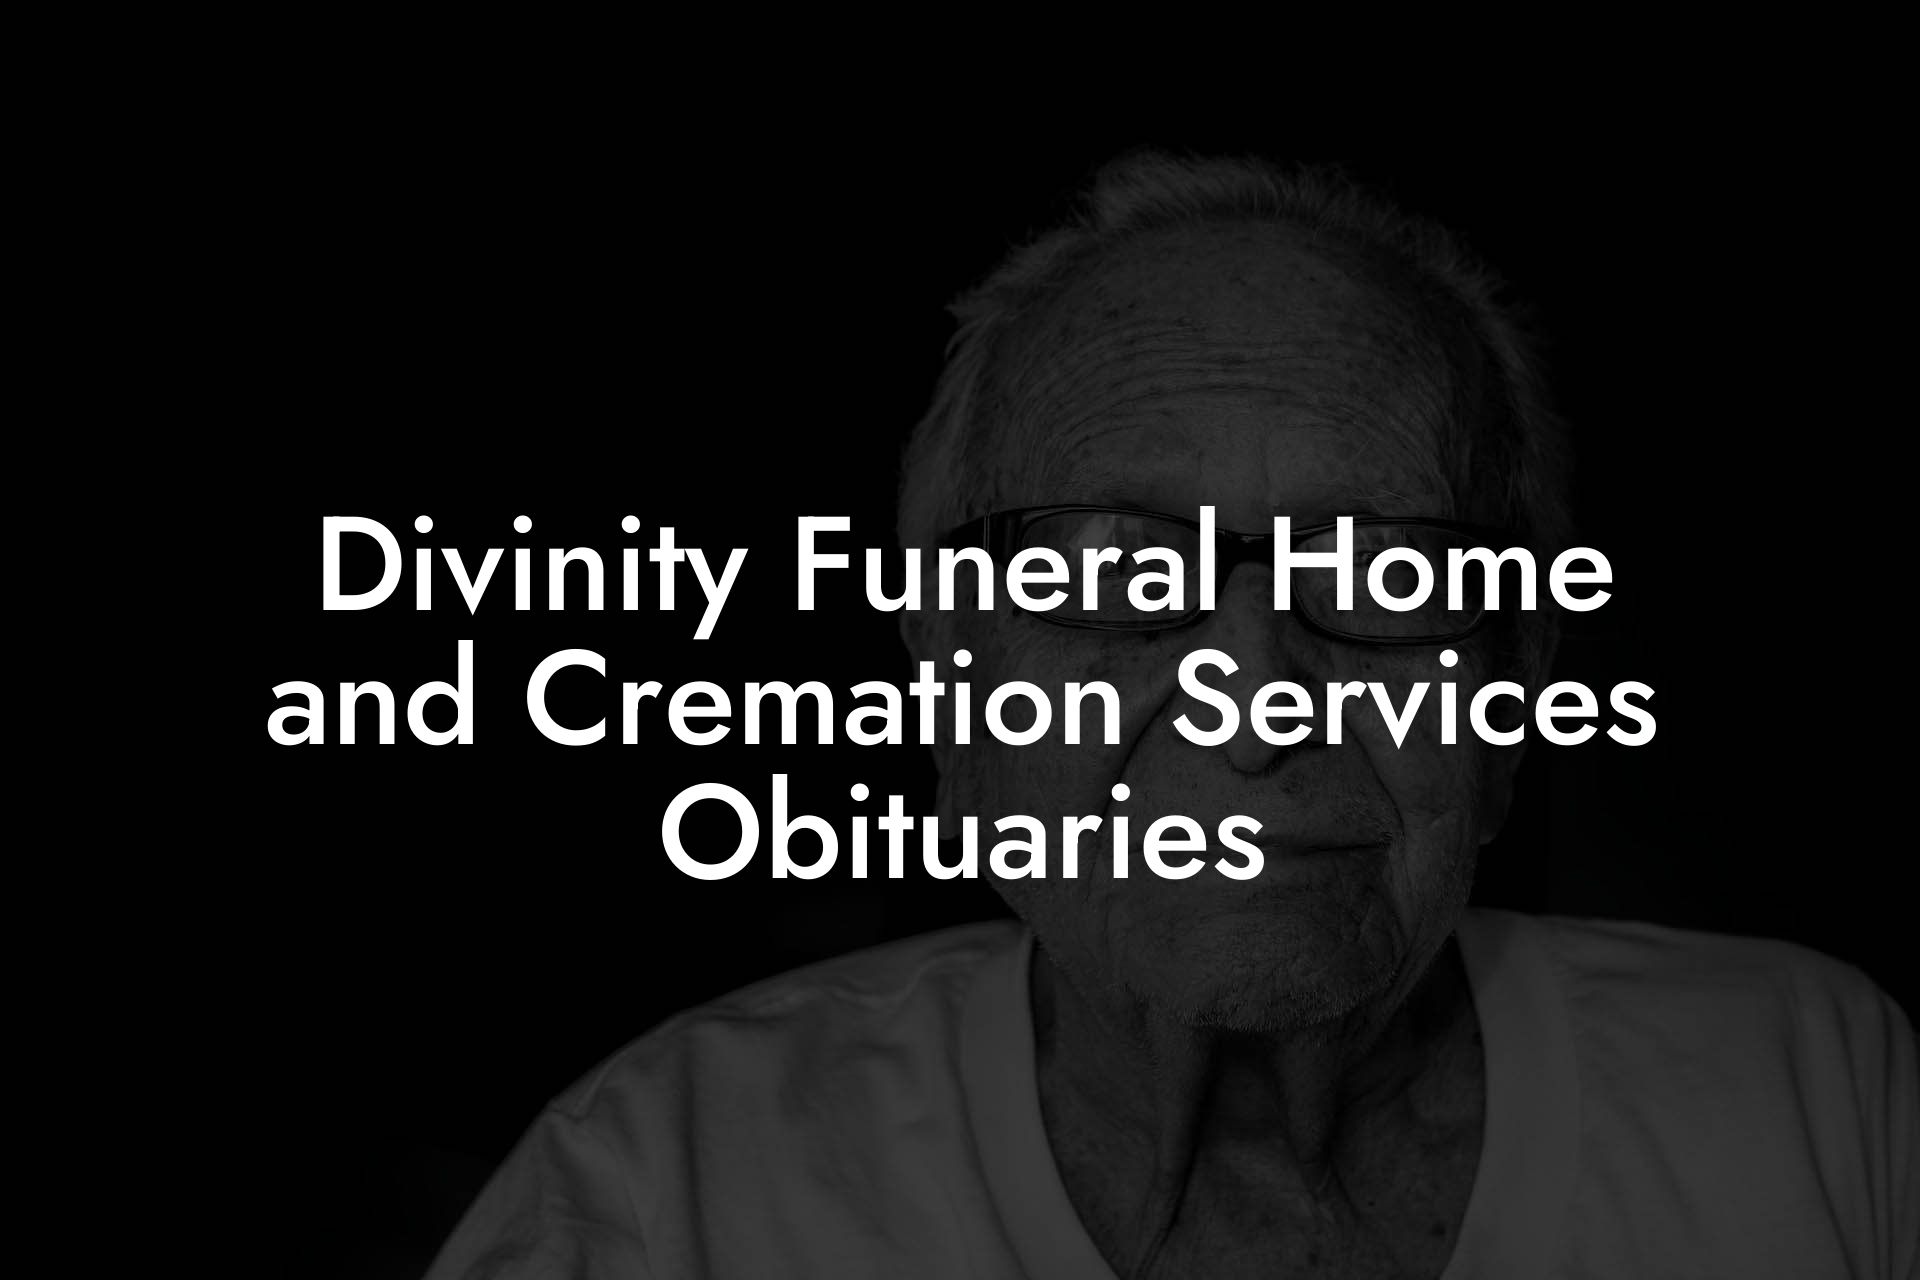 Divinity Funeral Home and Cremation Services Obituaries